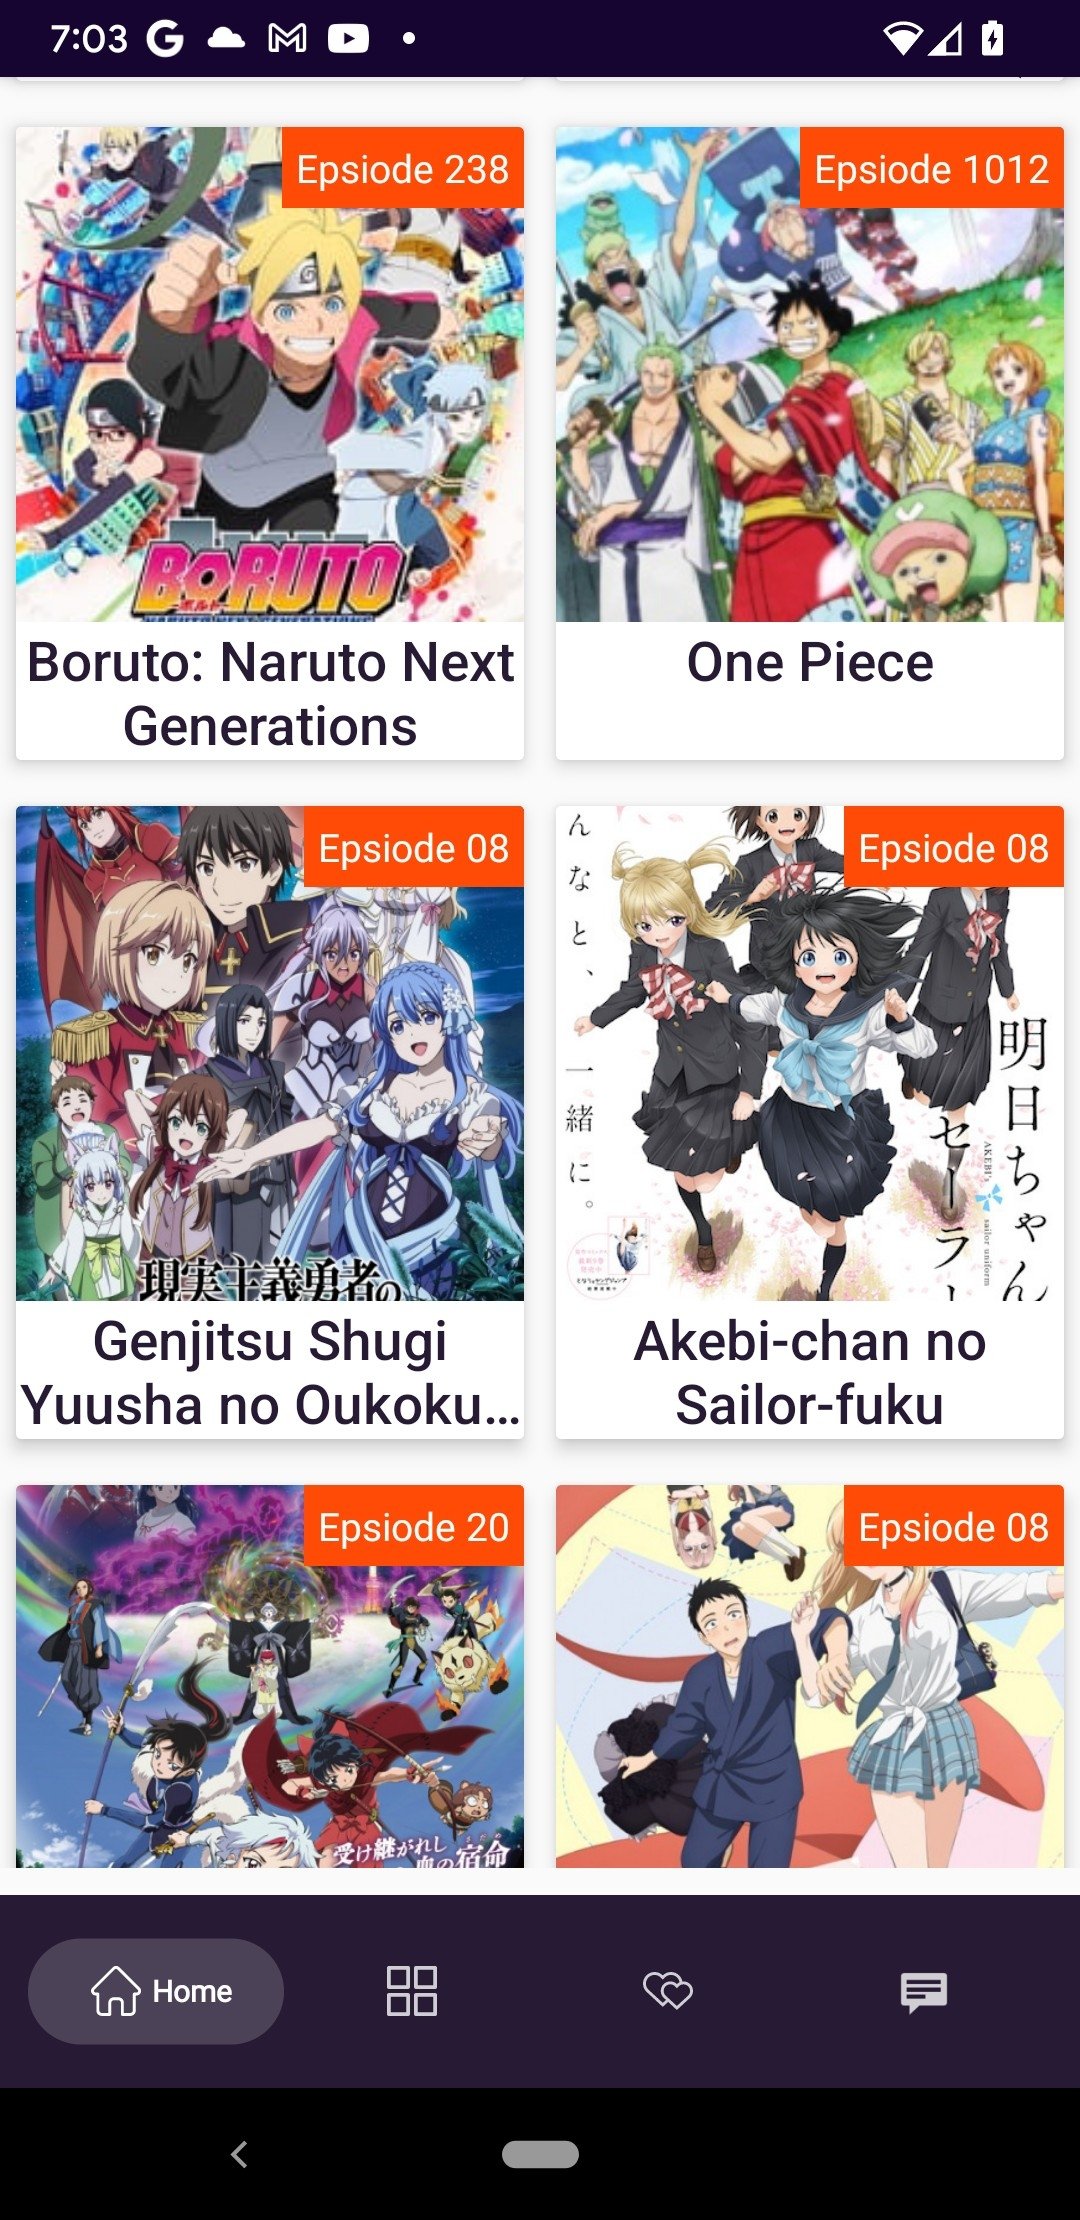 Anime Lovers APK download - Anime Lovers for Android Free